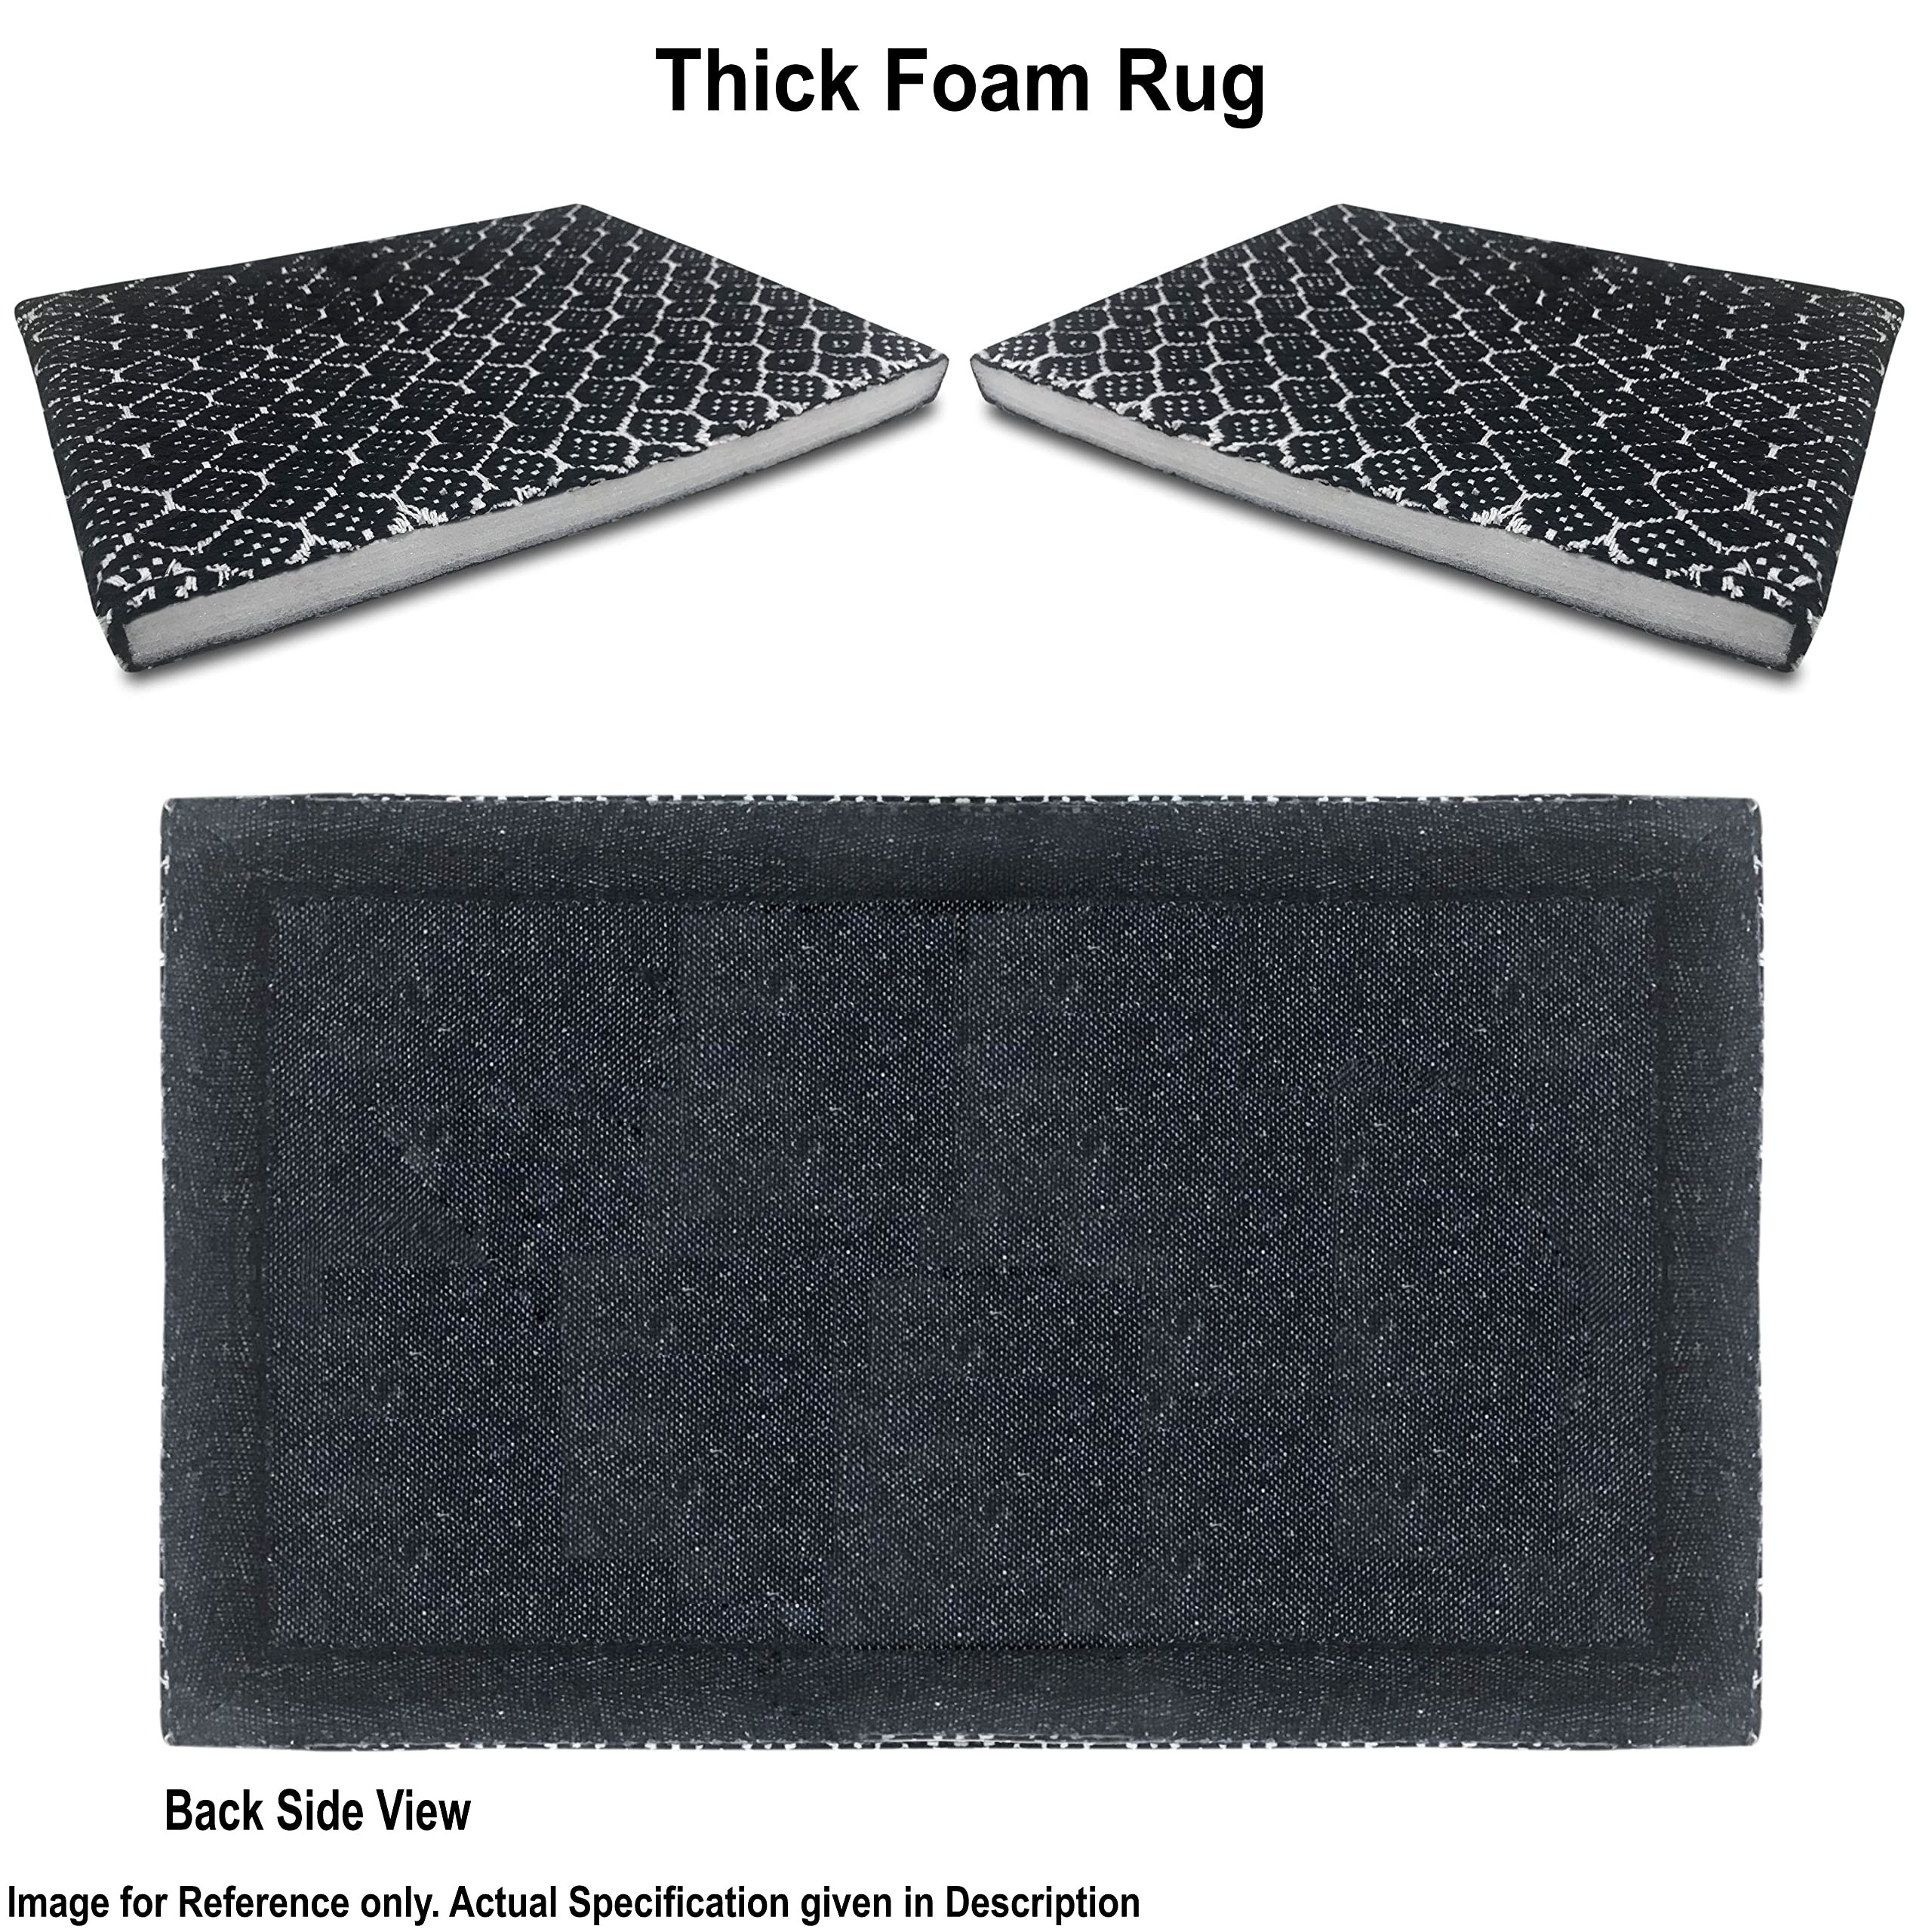 Kitchen Mat Cushioned Anti-Fatigue Kitchen Rug, Waterproof Non-Slip Kitchen Mats and Rugs Heavy Duty Comfort Foam Rug for Kitchen, Floor Home, Office, Sink, Laundry (Grey Box, 18''x30'')